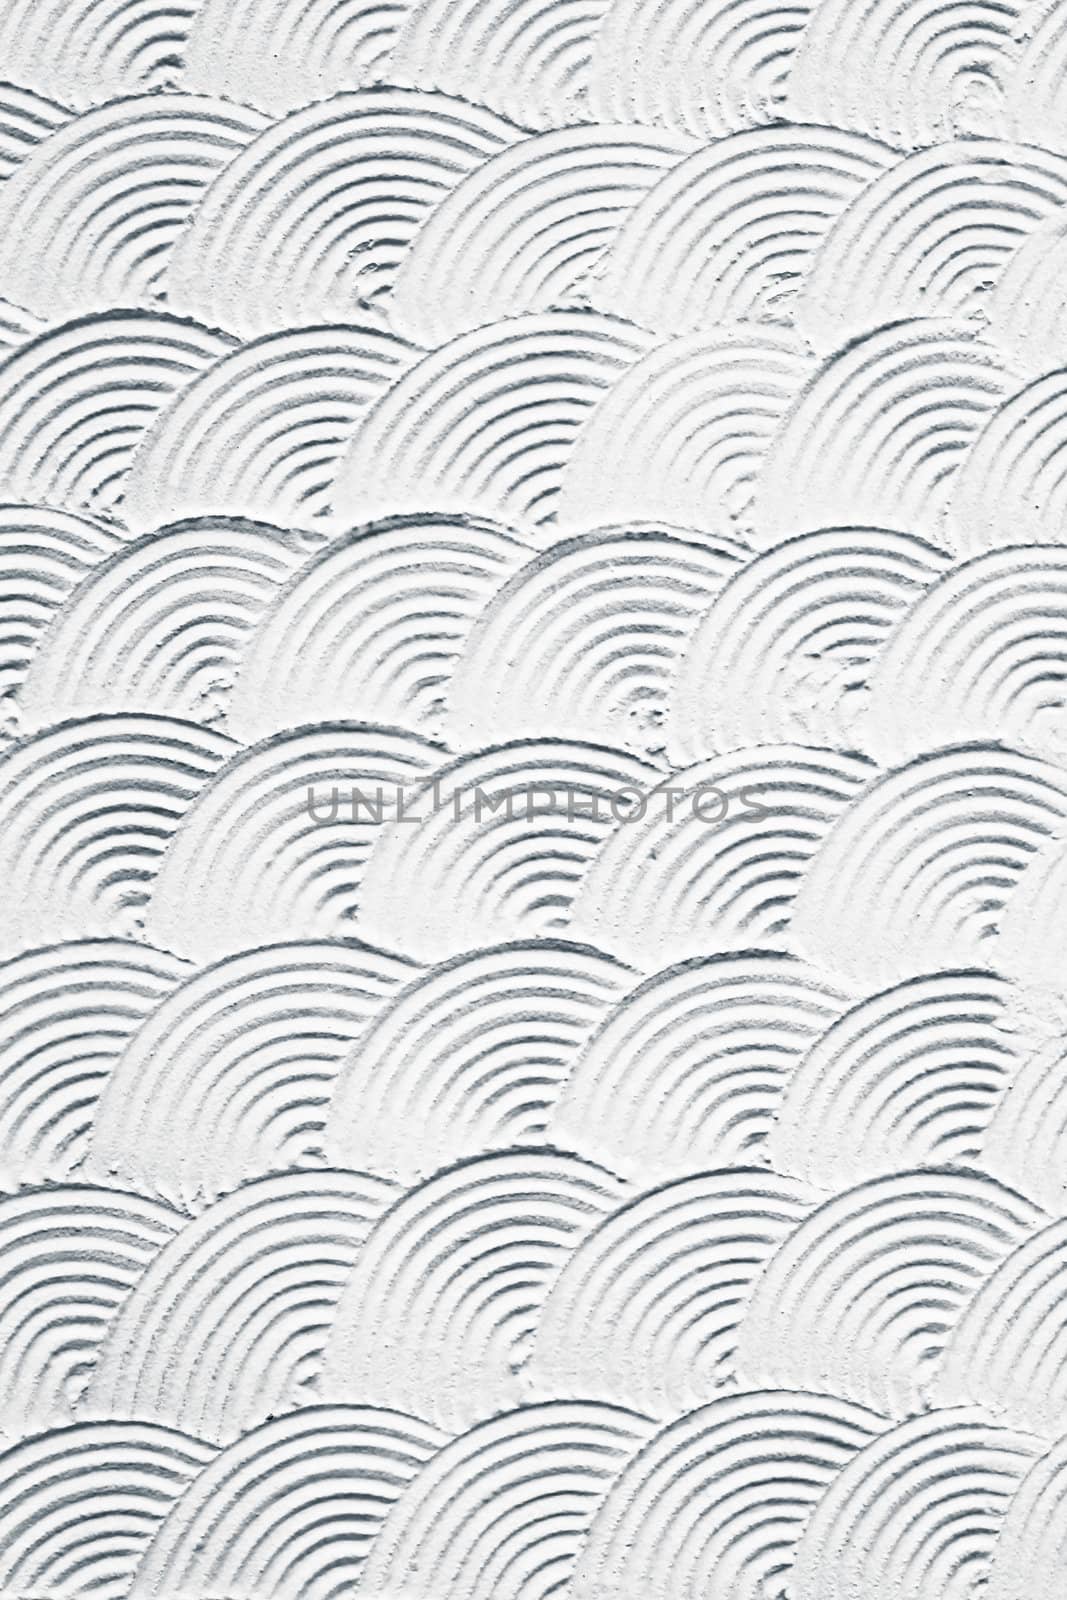 Detailed plaster pattern as a background image